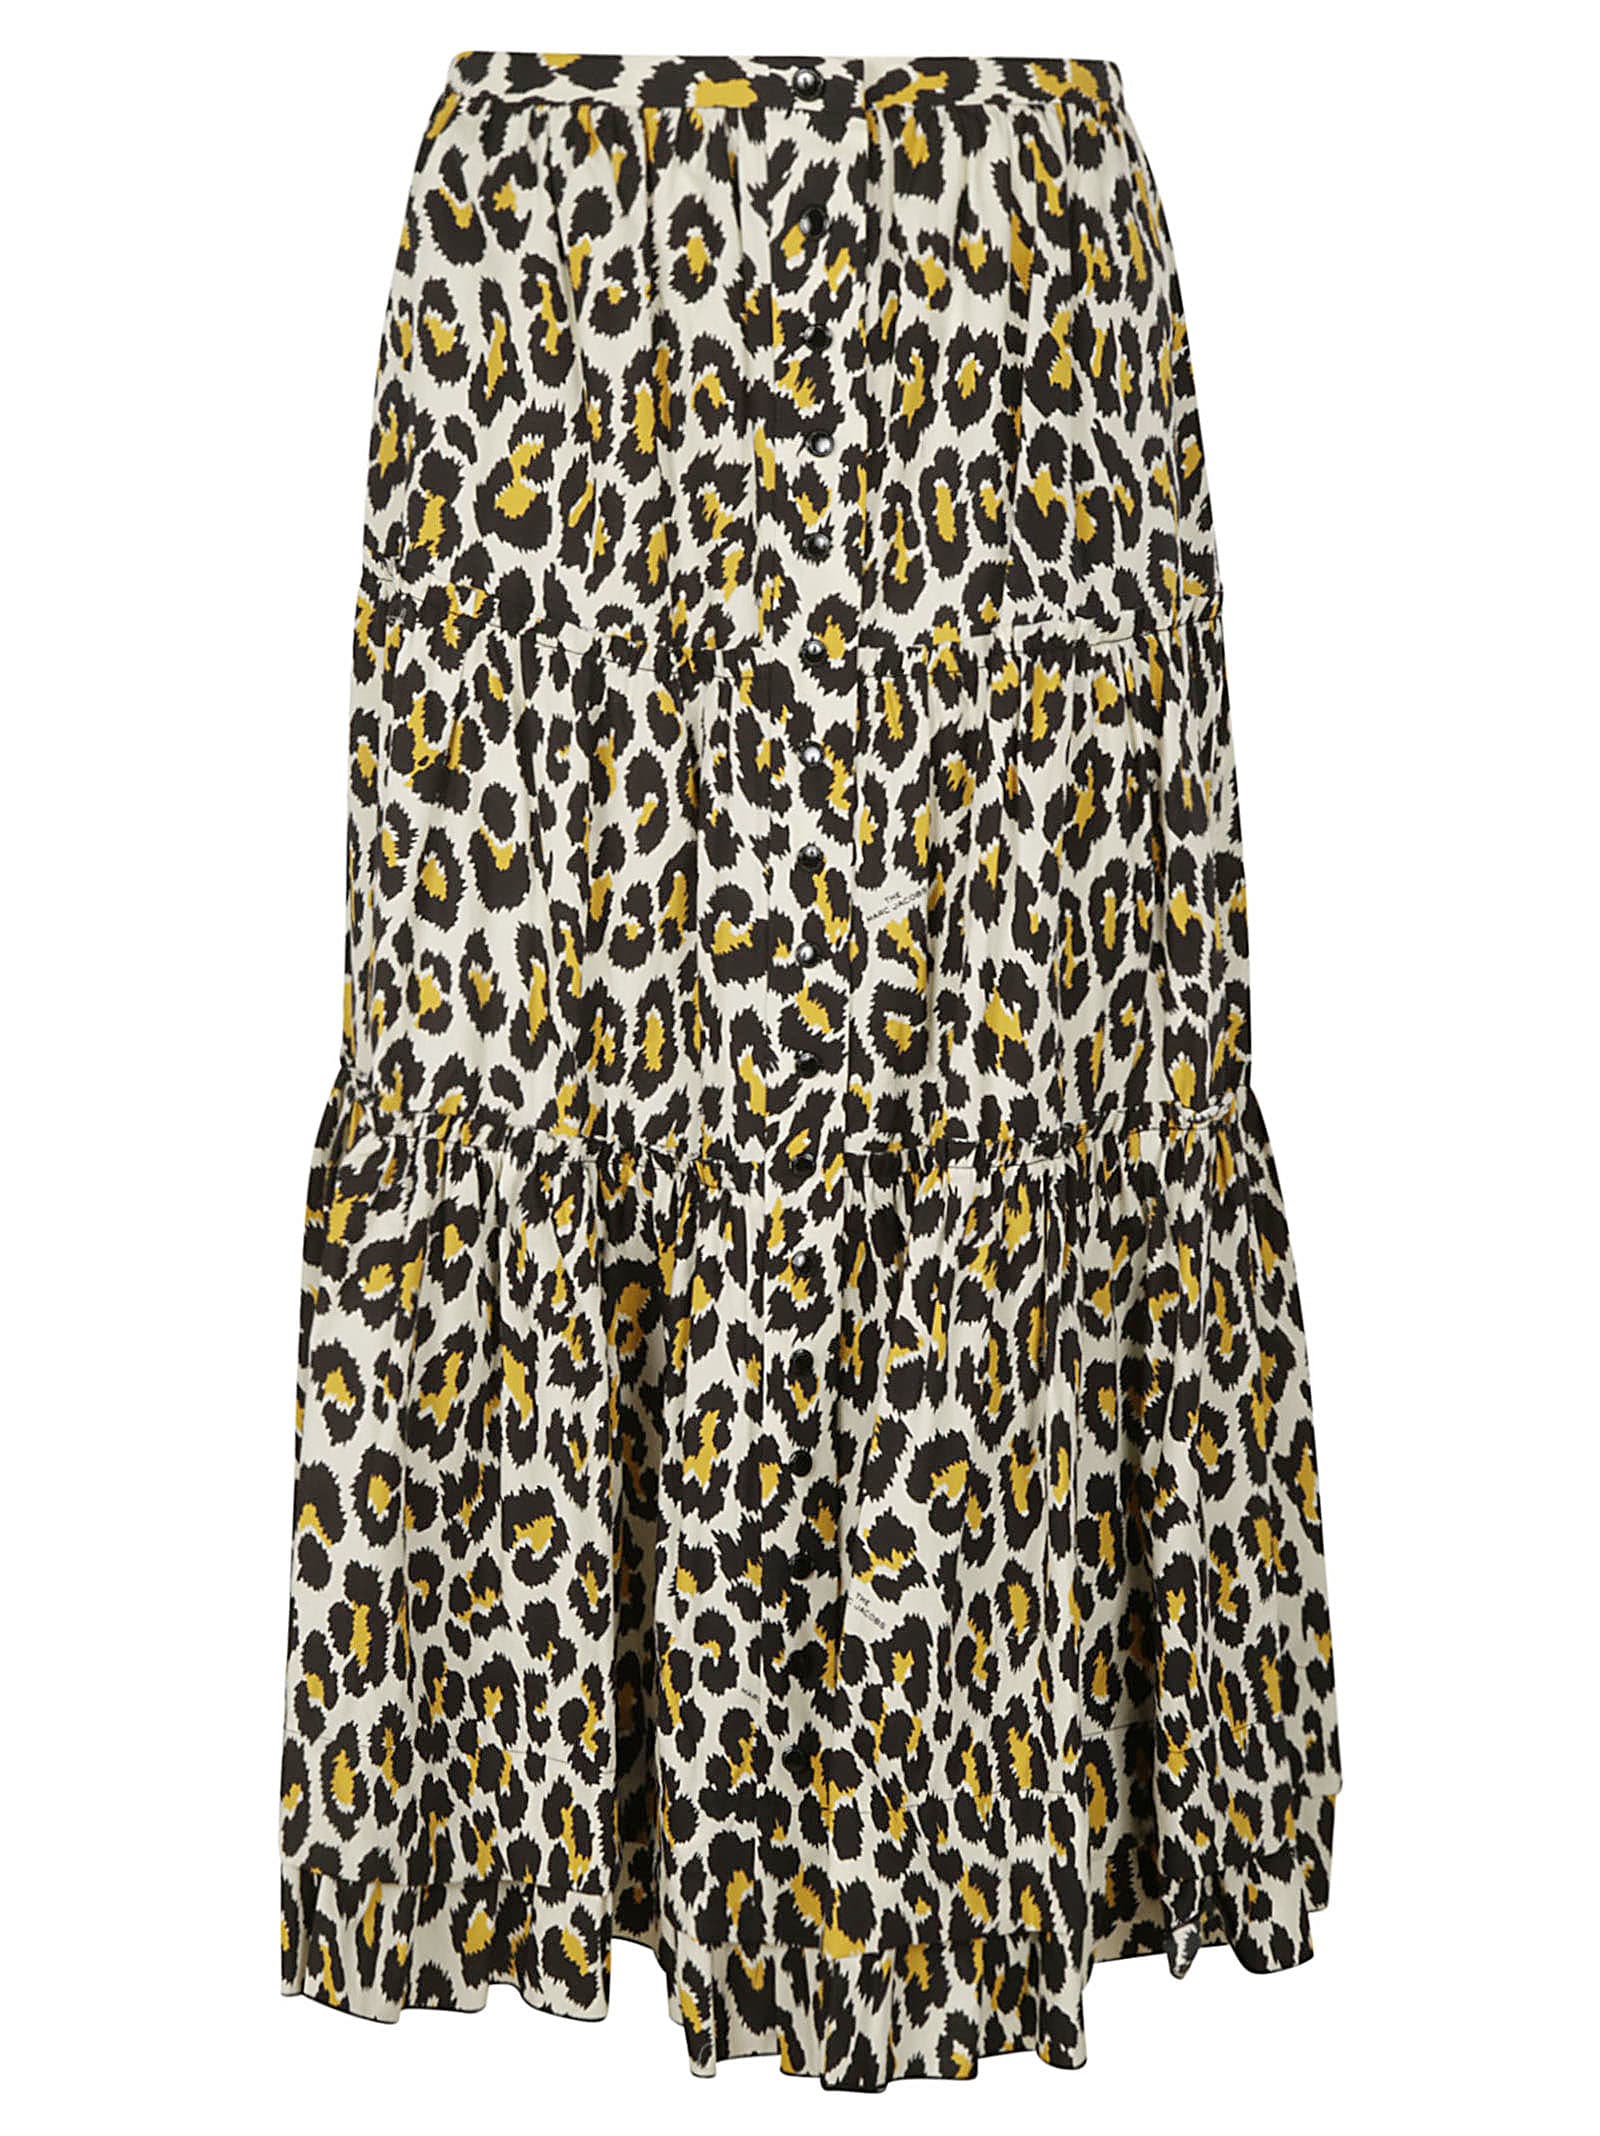 Marc Jacobs Flared Printed Skirt